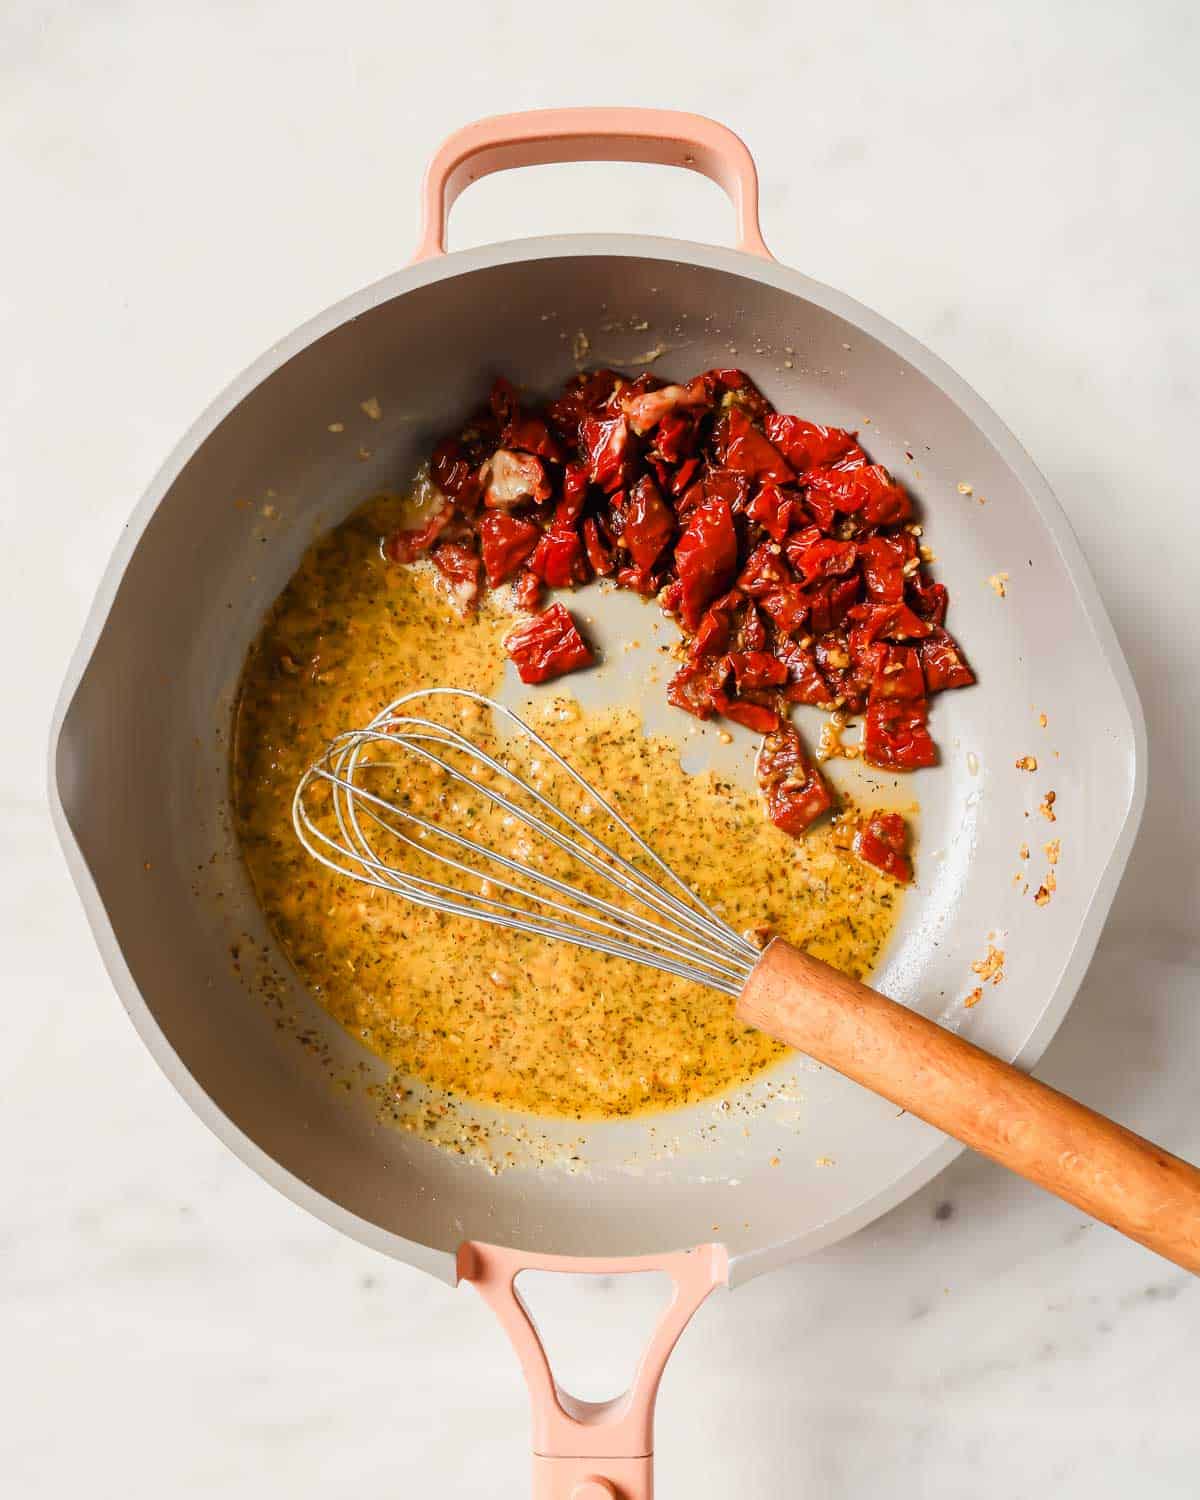 Whisk in a pan with a creamy sauce and chopped sun-dried tomatoes on one side.